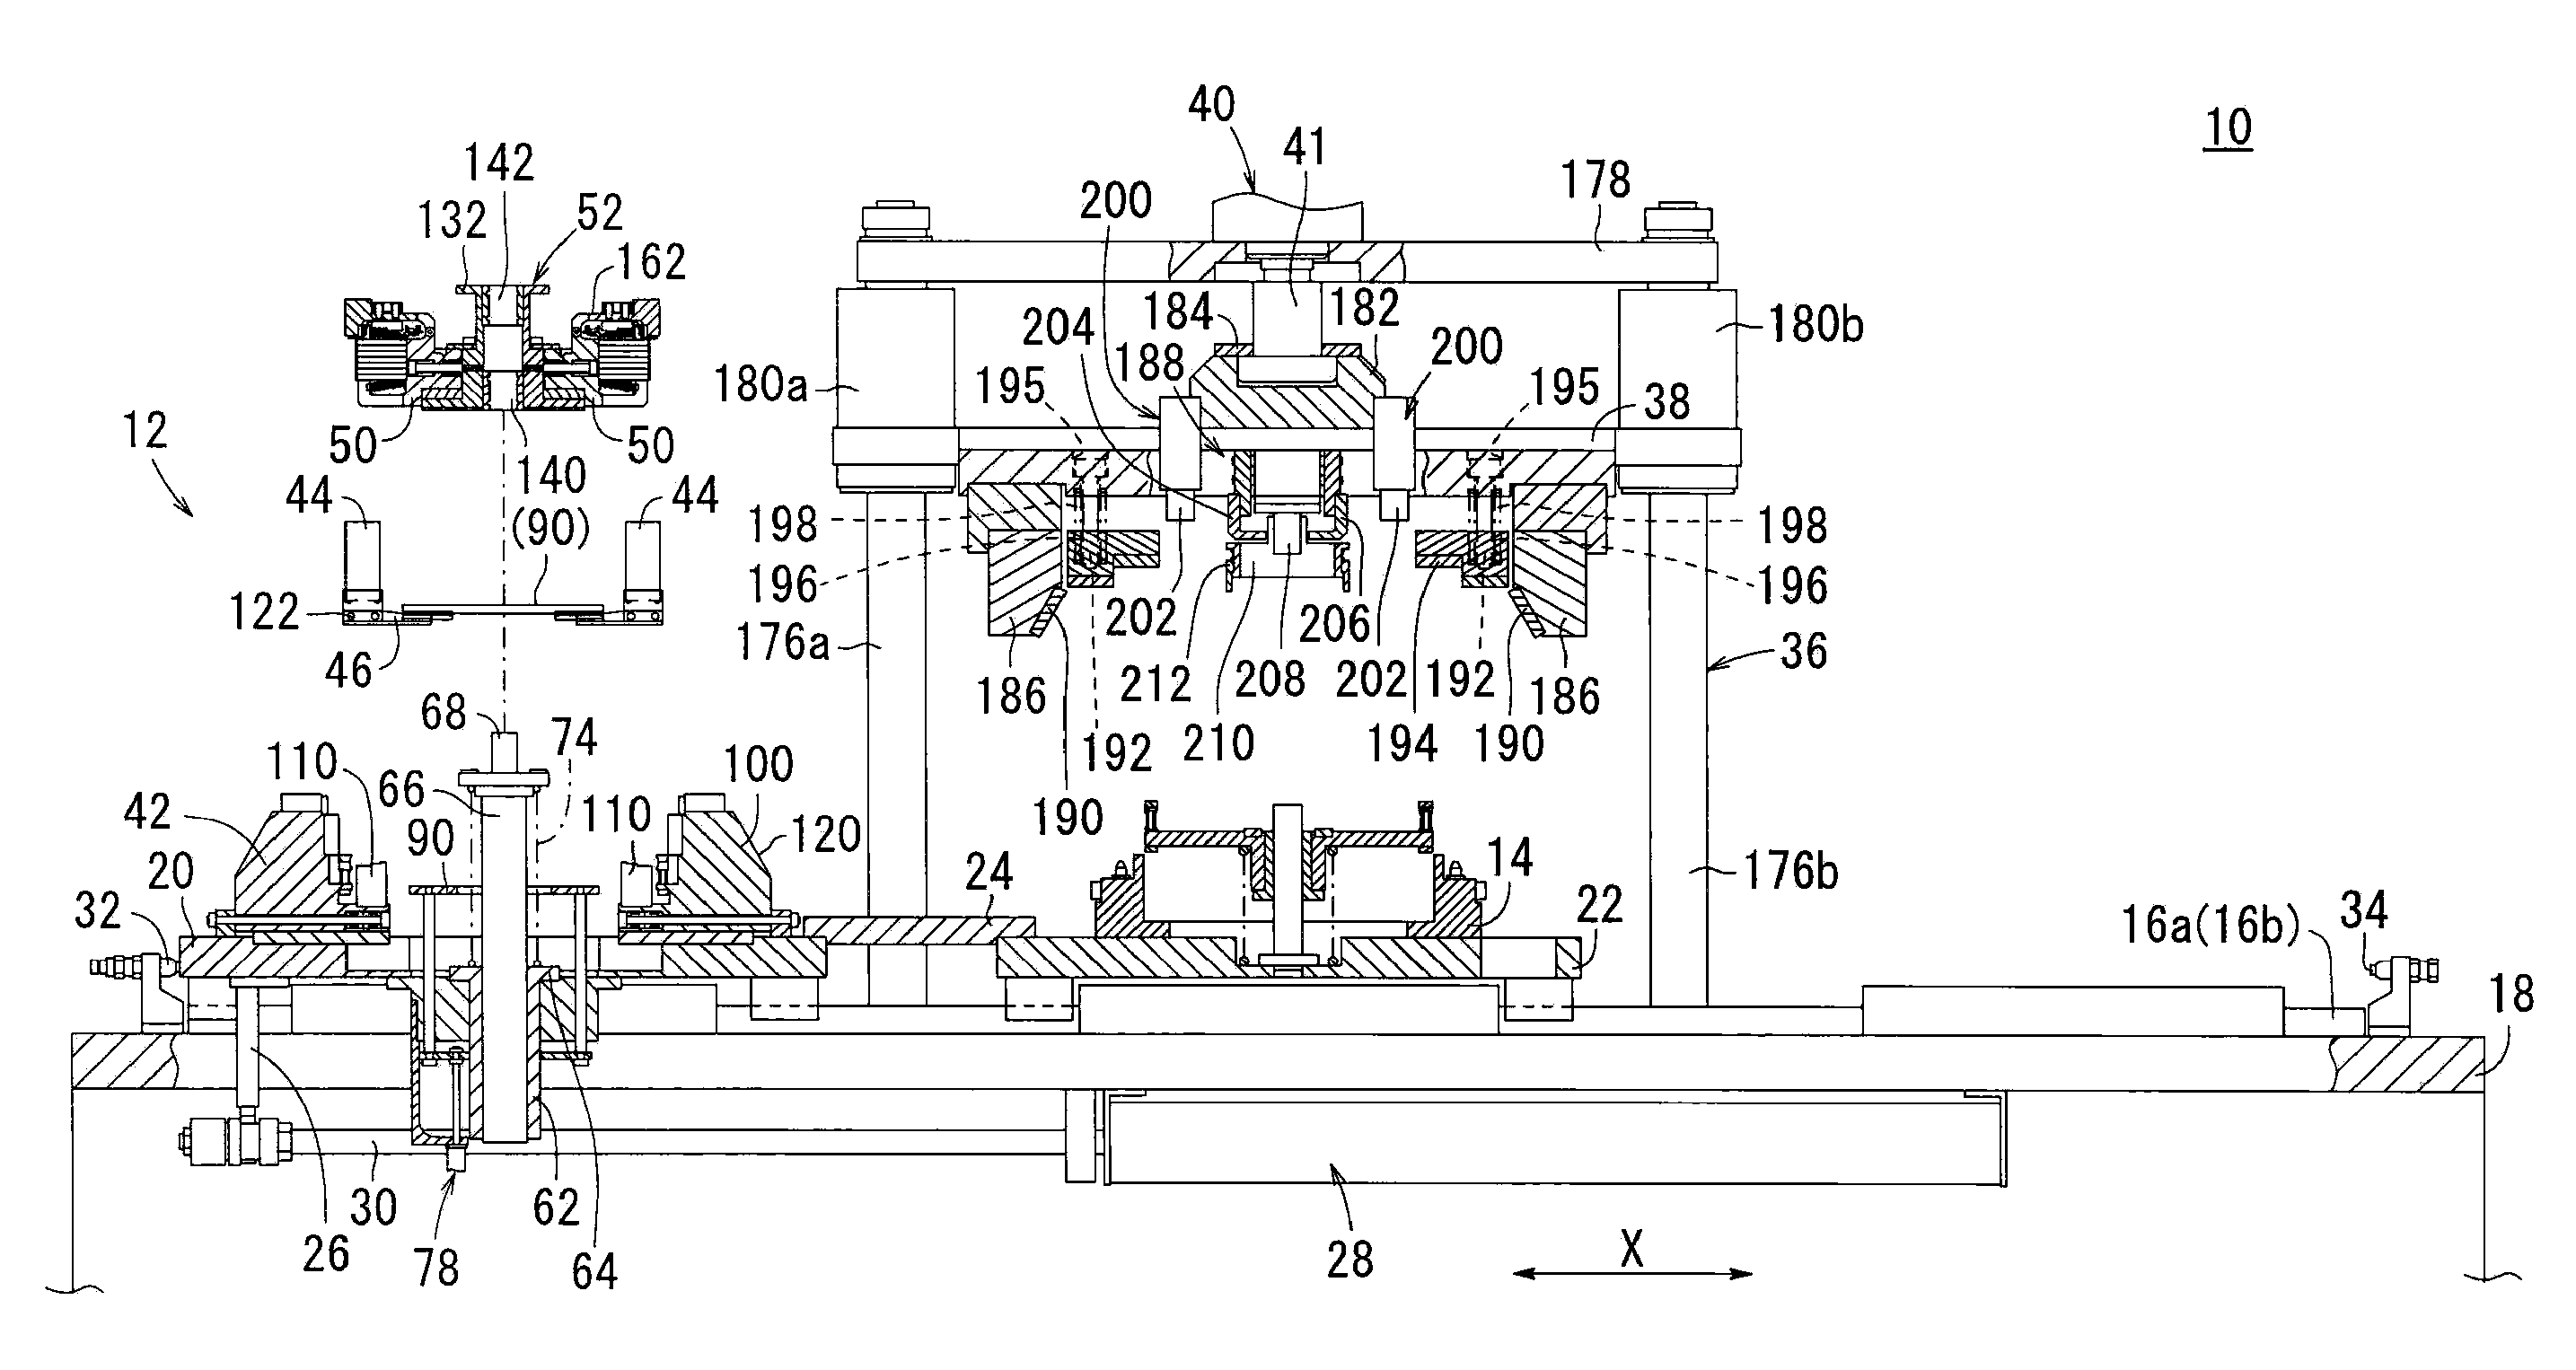 Filter, duplexer and communication apparatus